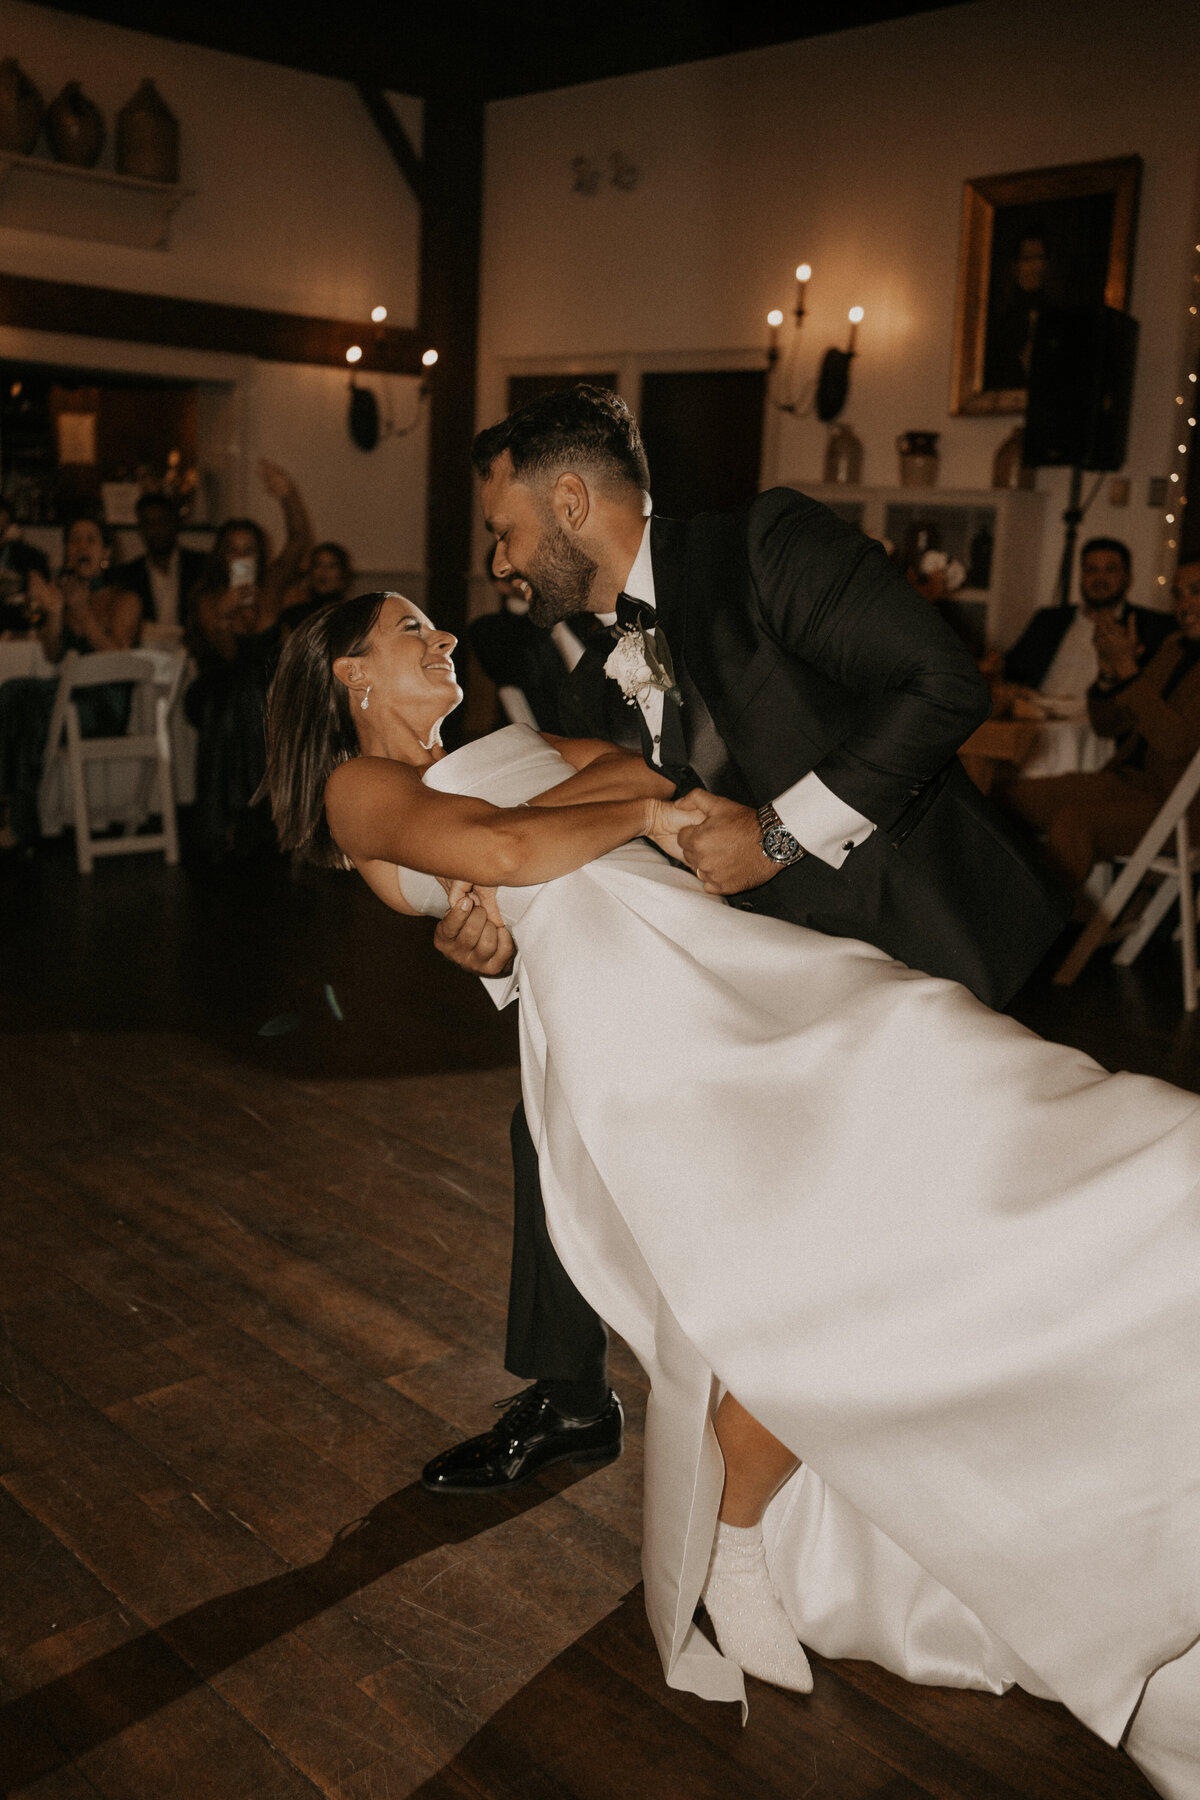 Bride and groom share a joyful dip on the dance floor during their wedding reception. The bride, in an elegant white gown, and the groom, in a black tuxedo, smile and laugh as they dance. The background shows cheering guests, capturing the lively and celebratory atmosphere of the evening.